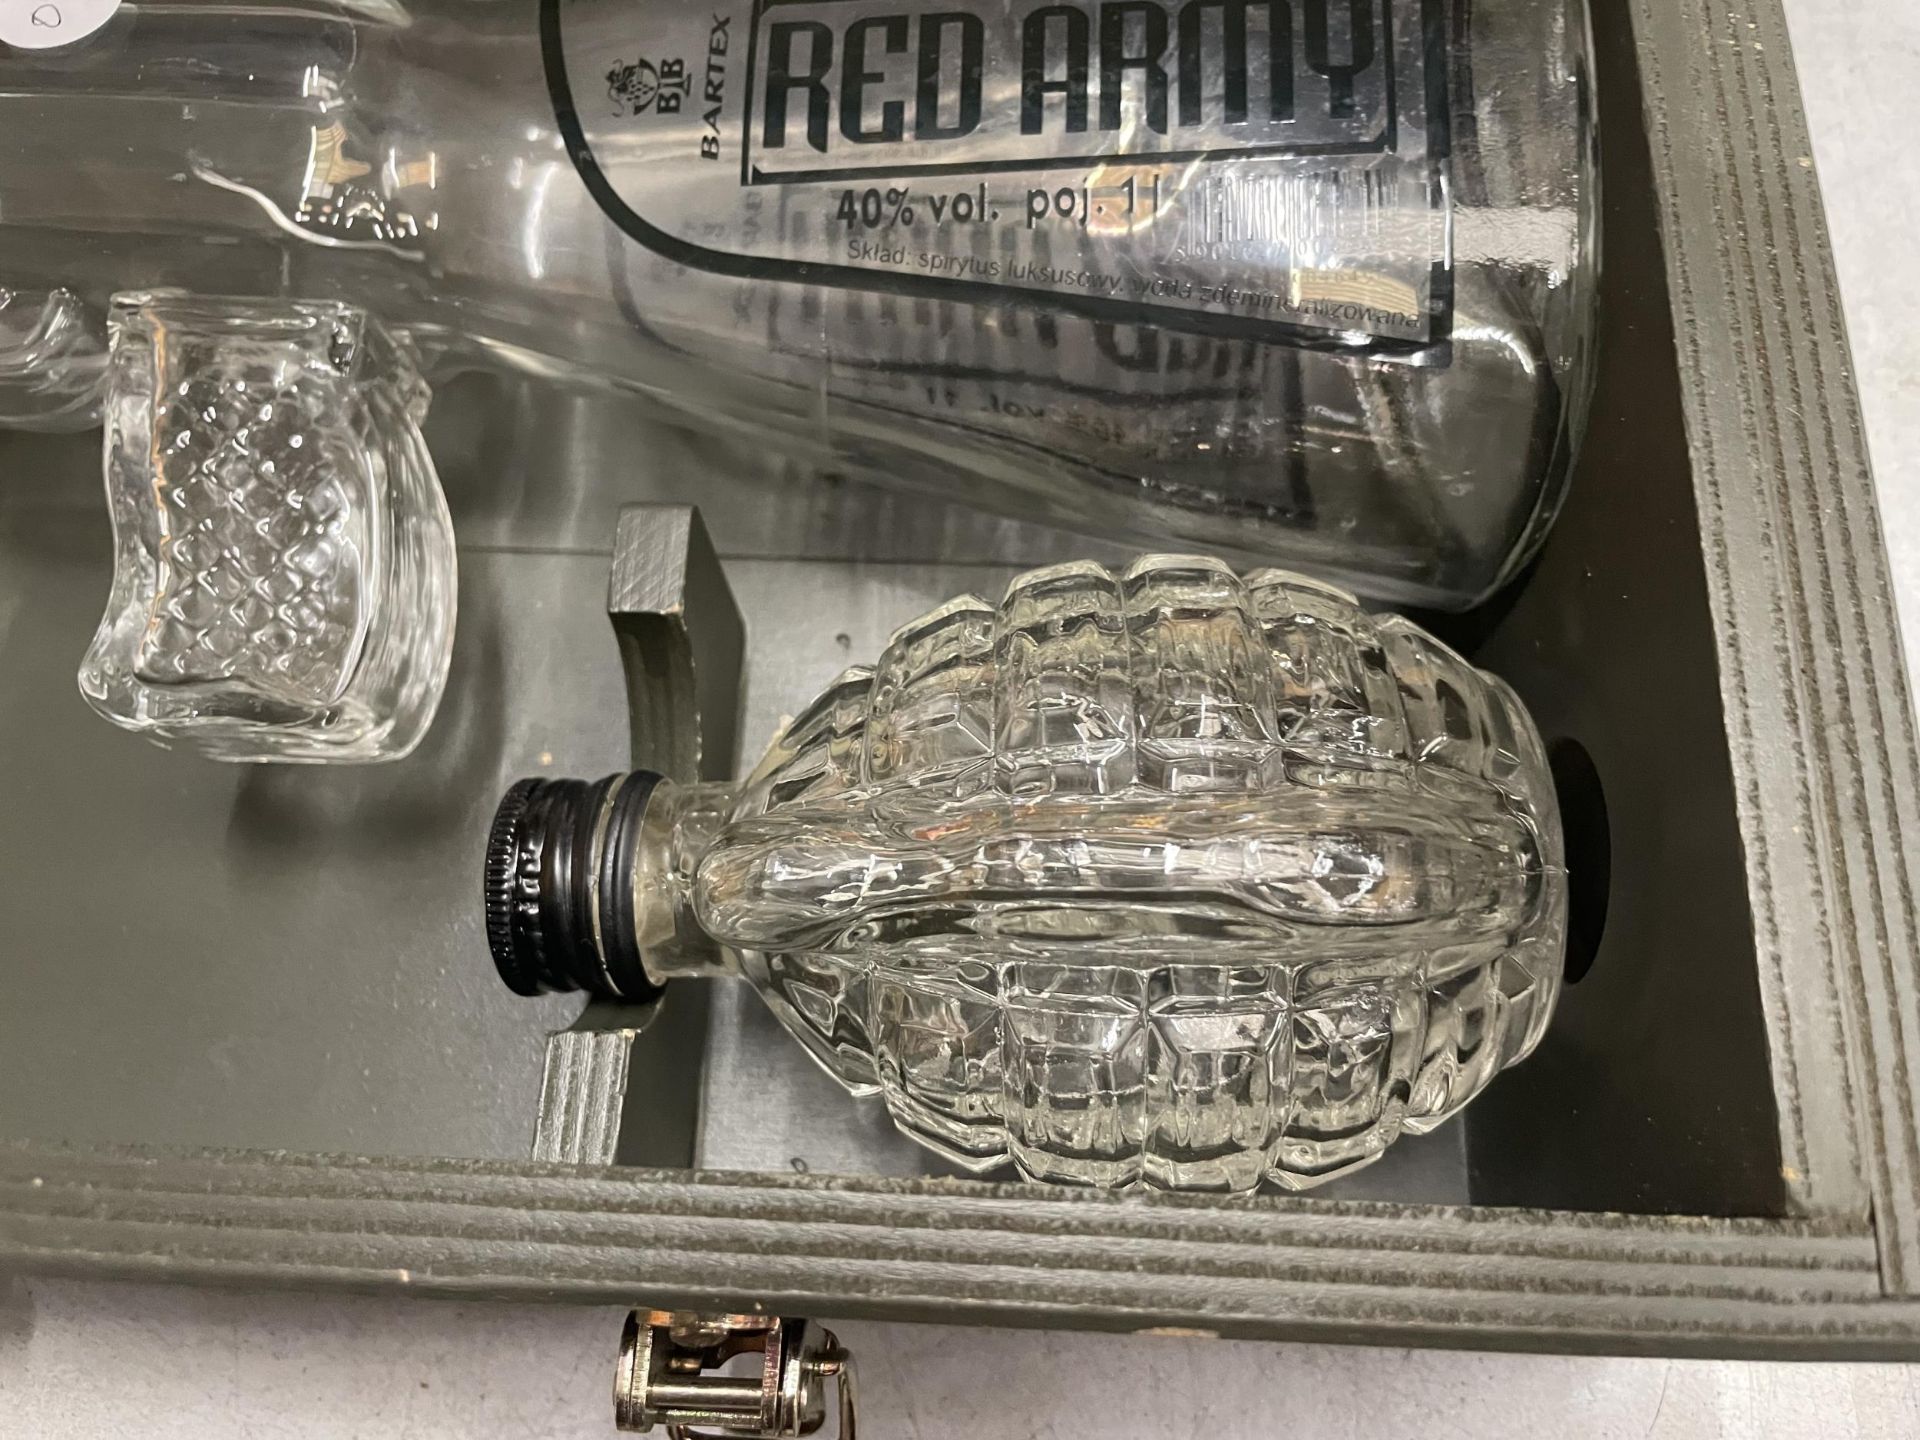 A BOXED RED ARMY GLASS GUN SPIRITS BOTTLE, SIX GLASSES AND GRENADE HIP FLASK - Image 3 of 5